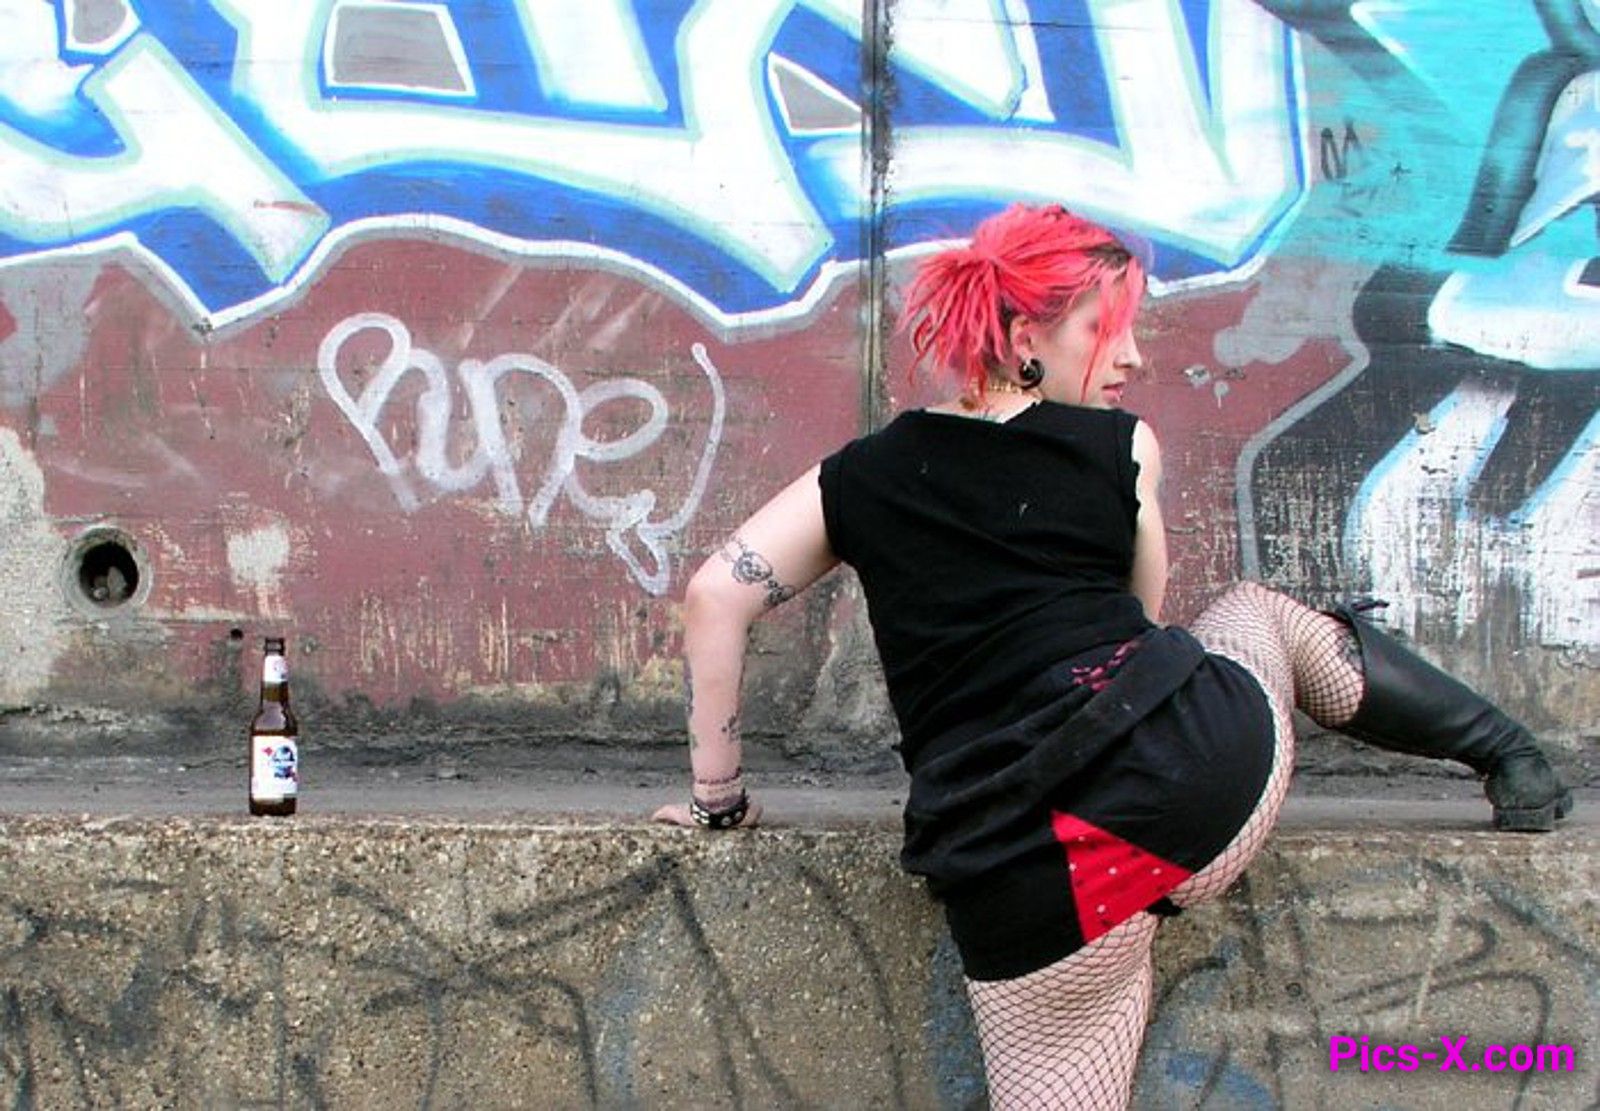 Pink haired goth babe posing on some train tracks - Punk Rock Girlfriend - Image 11